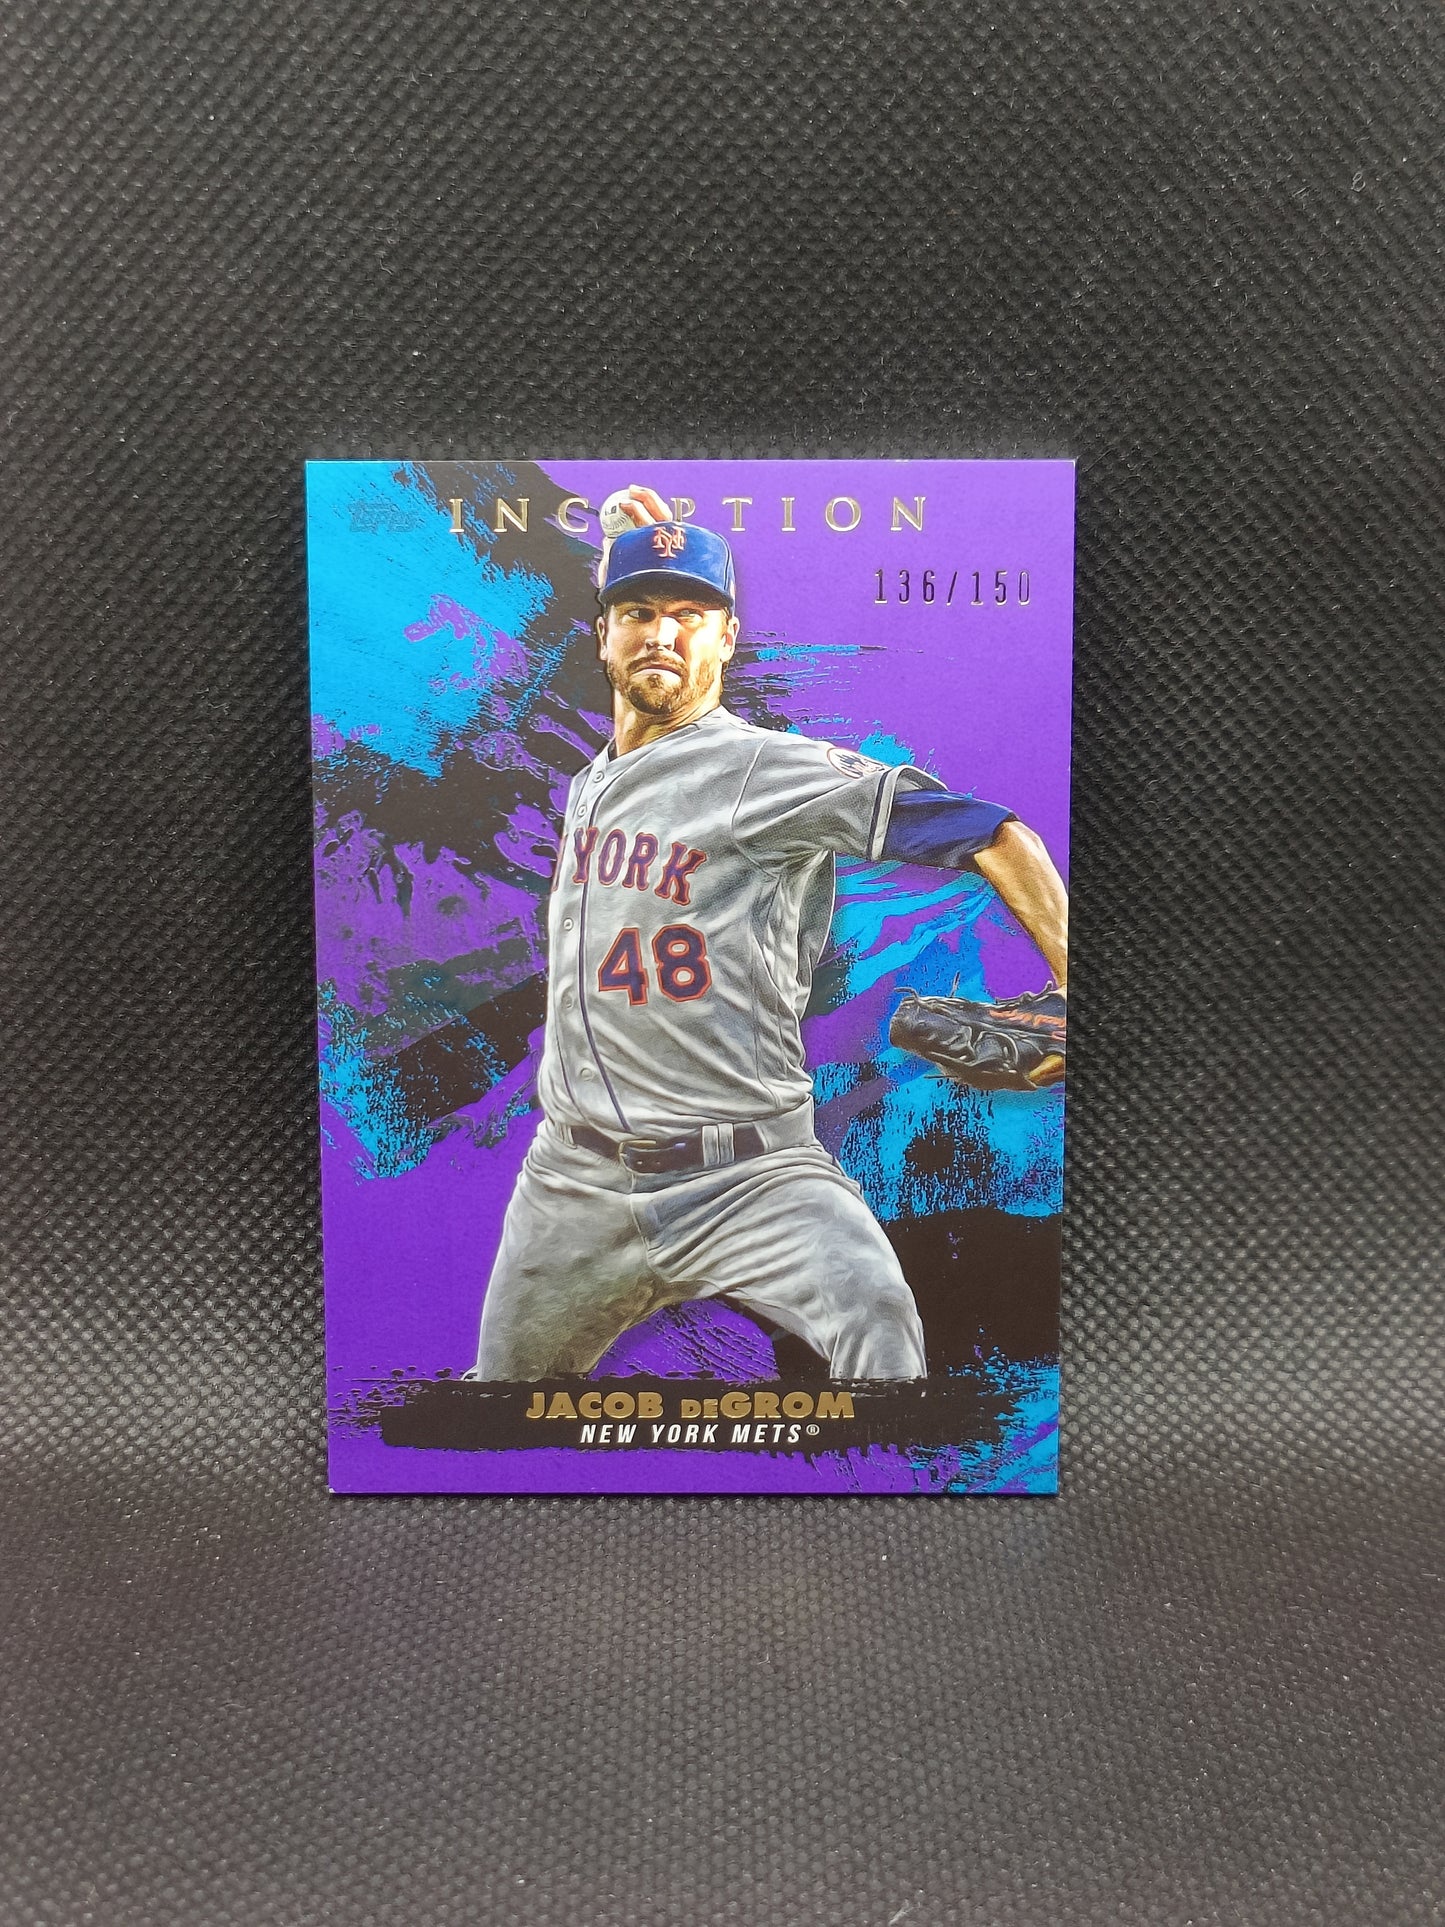 Jacob DeGrom - 2021 Topps Inception Purple /150 - New York Mets